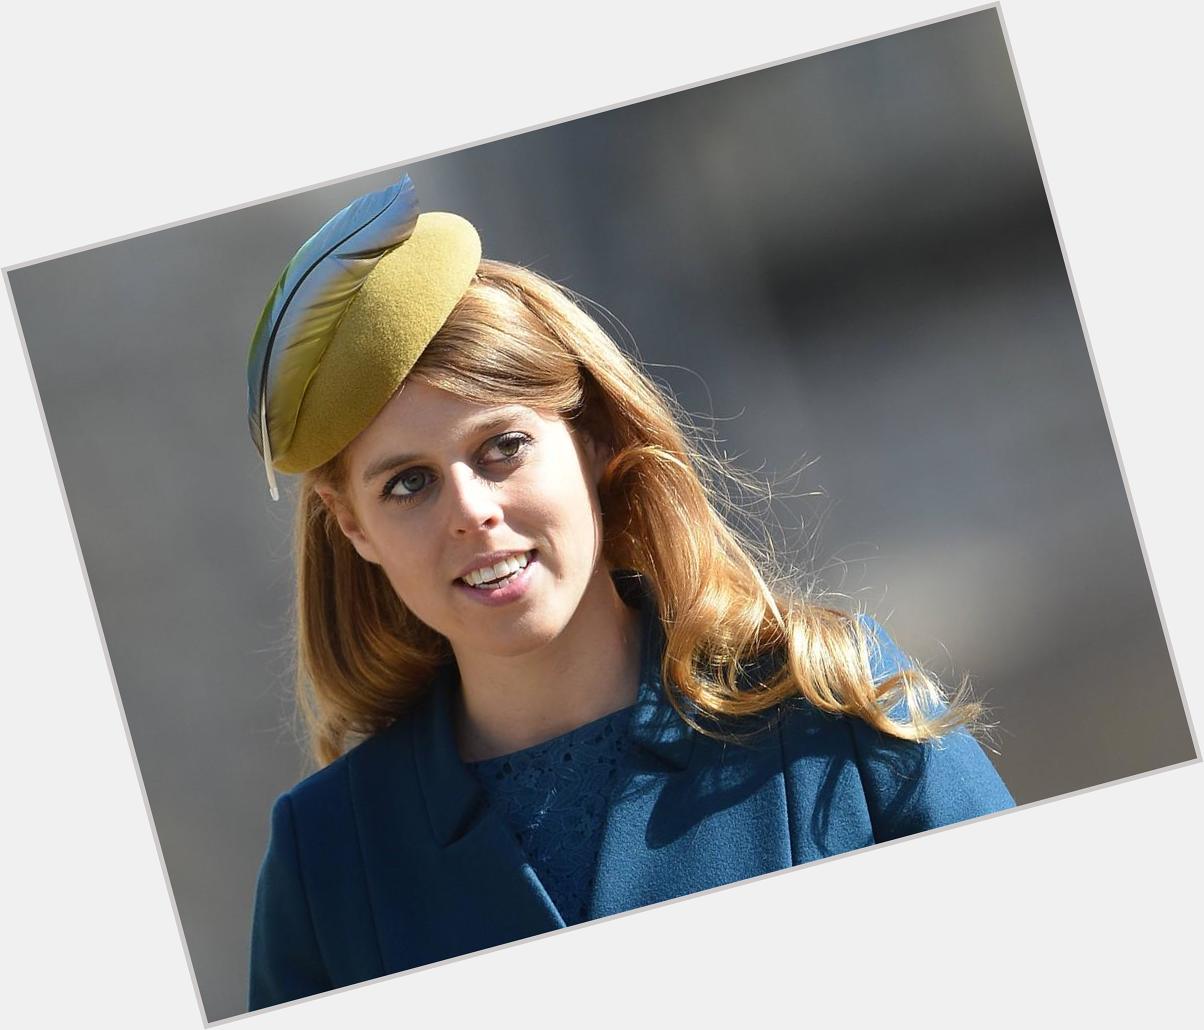 A happy 27th birthday to Princess Beatrice of York - granddaughter of The Queen and 7th-in-line to the throne! 